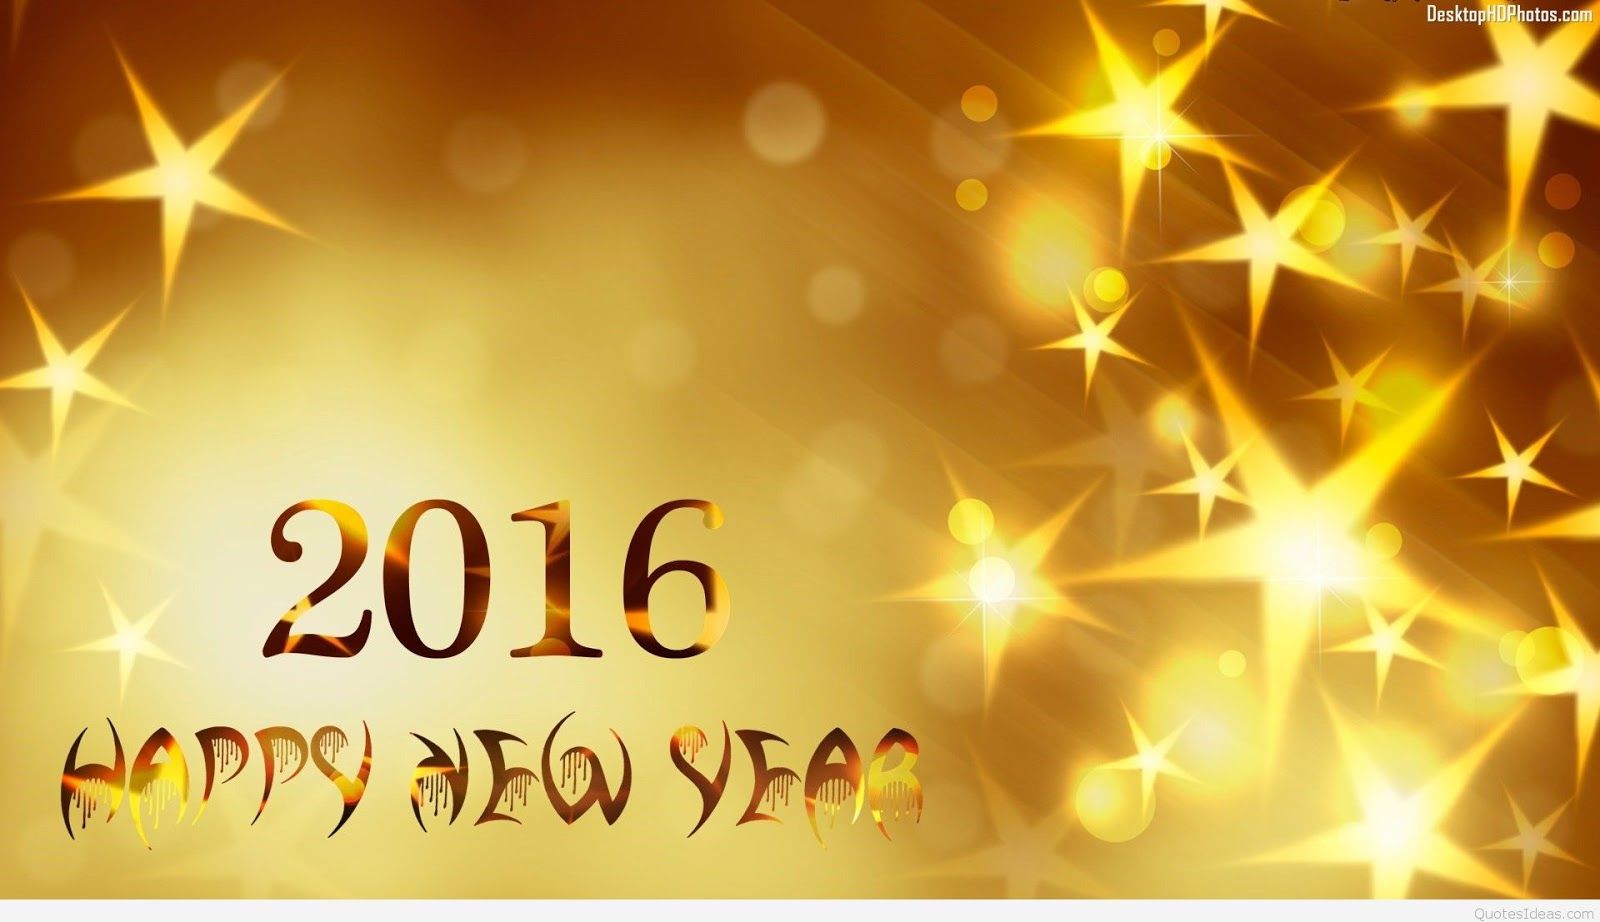 2016 Happy New Years Wallpaper Pictures Photos and Images for